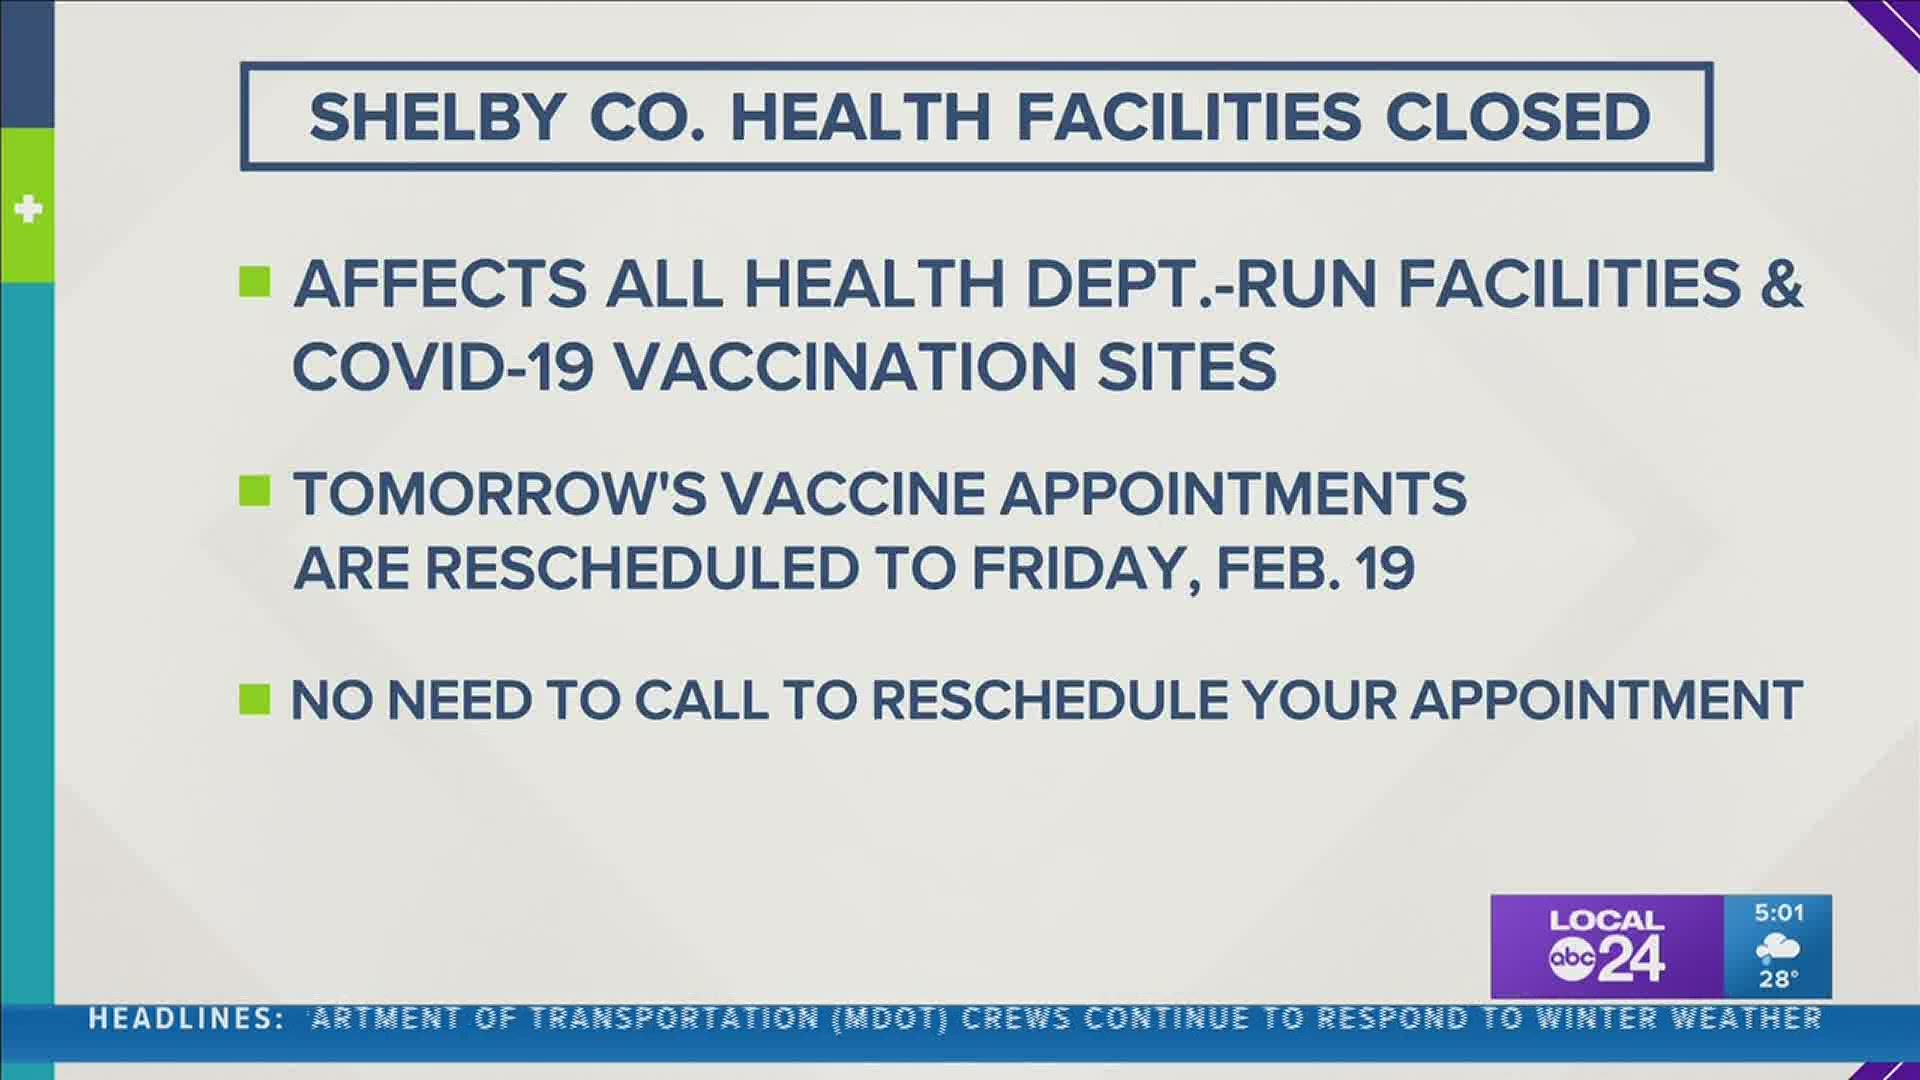 All COVID-19 vaccinations scheduled for Friday, February 12th will be rescheduled to Friday, February 19th.